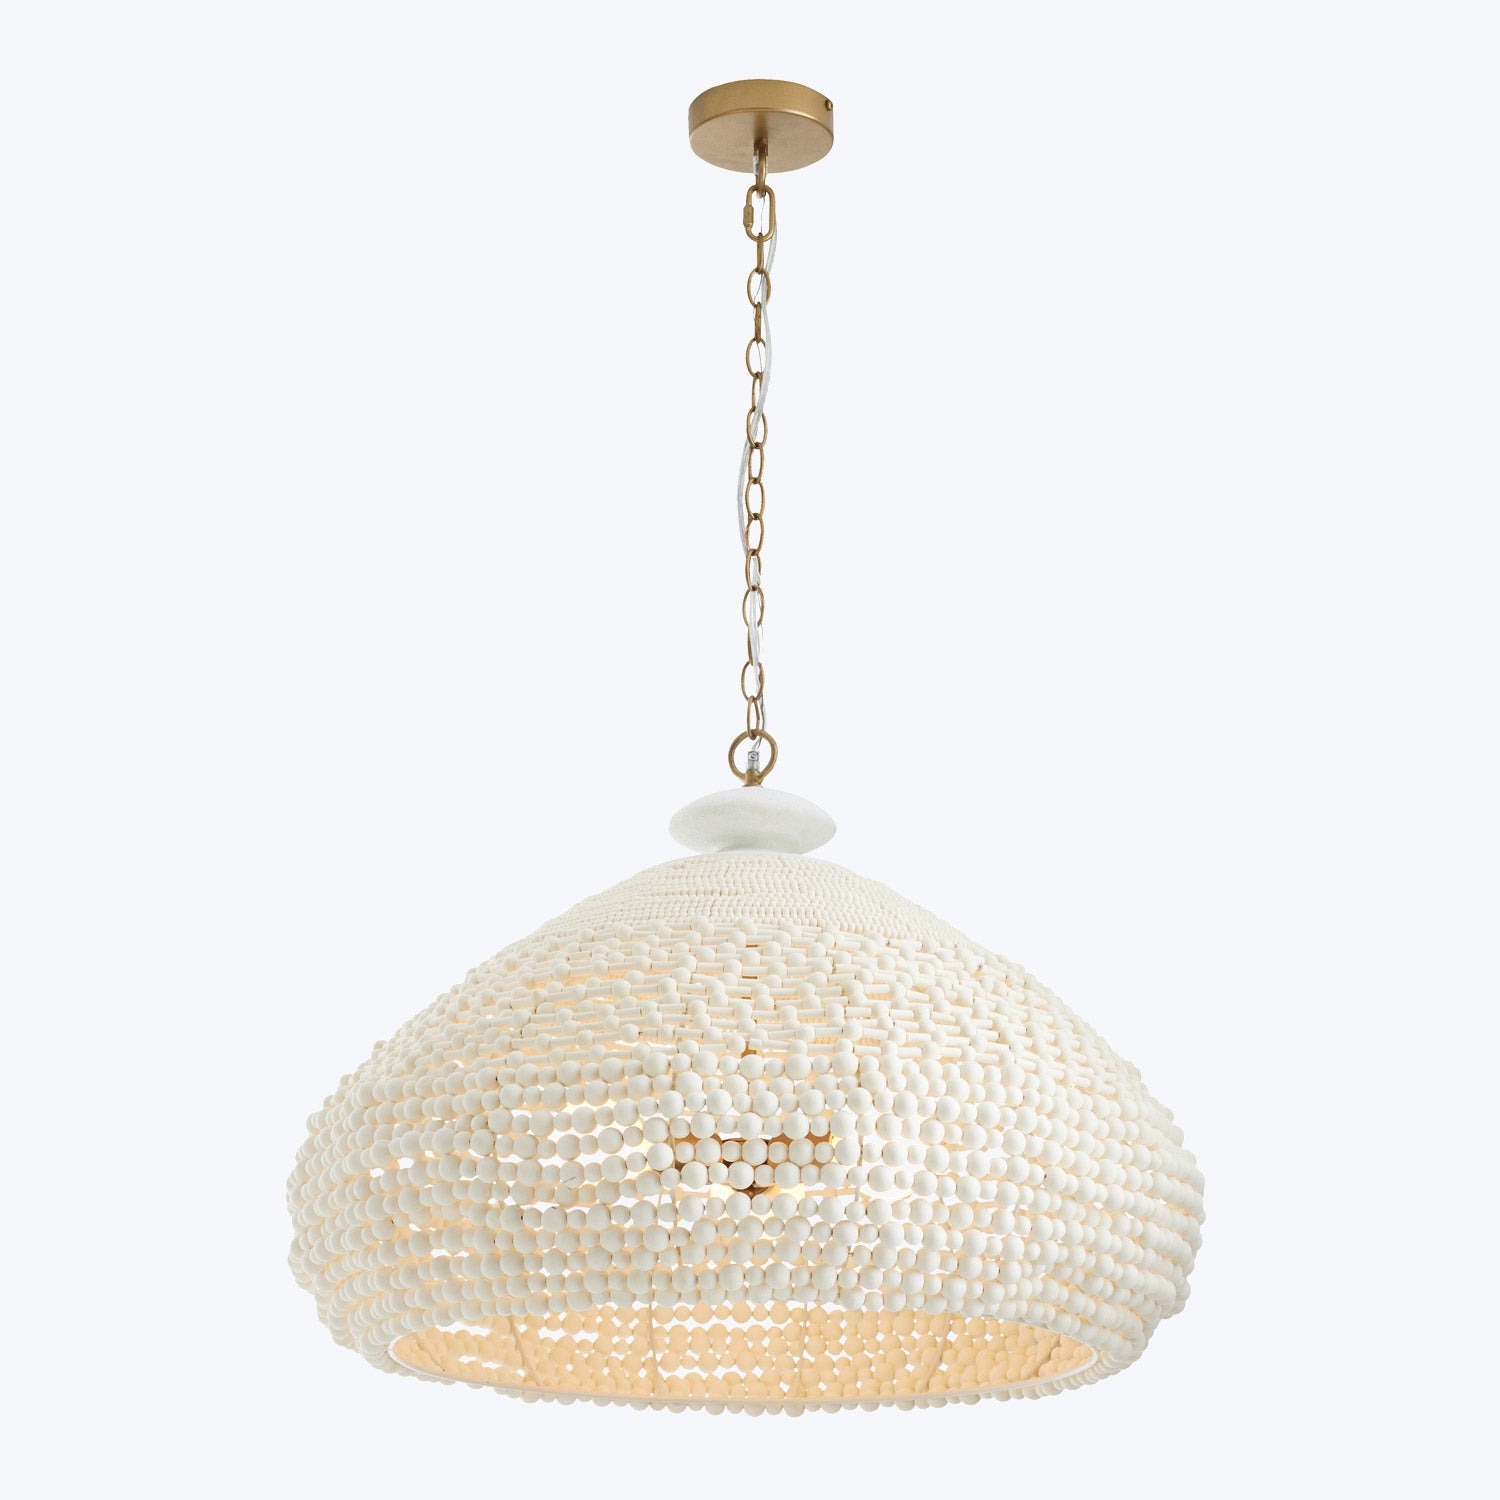 Elegant pendant light with textured shade emits warm, ambient glow.